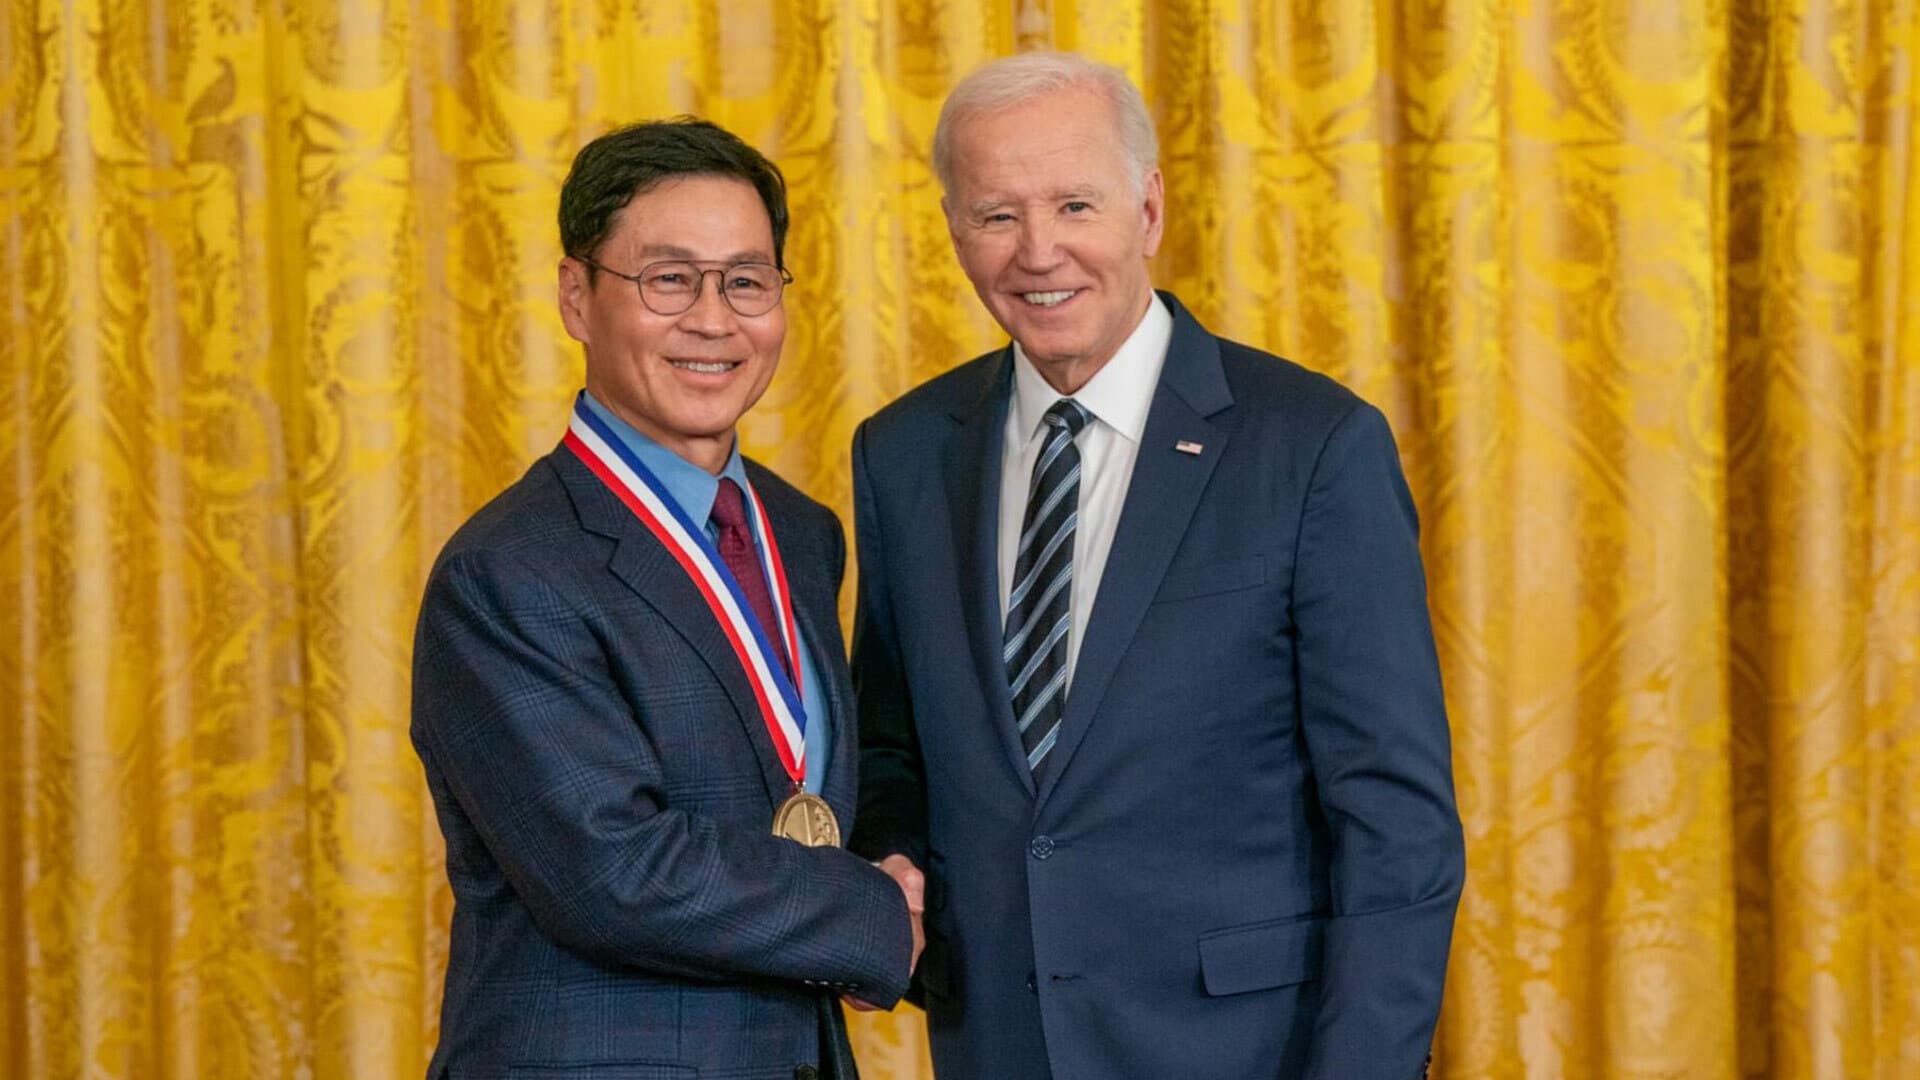 Jeong H. Kim with a medal around his neck, shaking hands with President Joe Biden